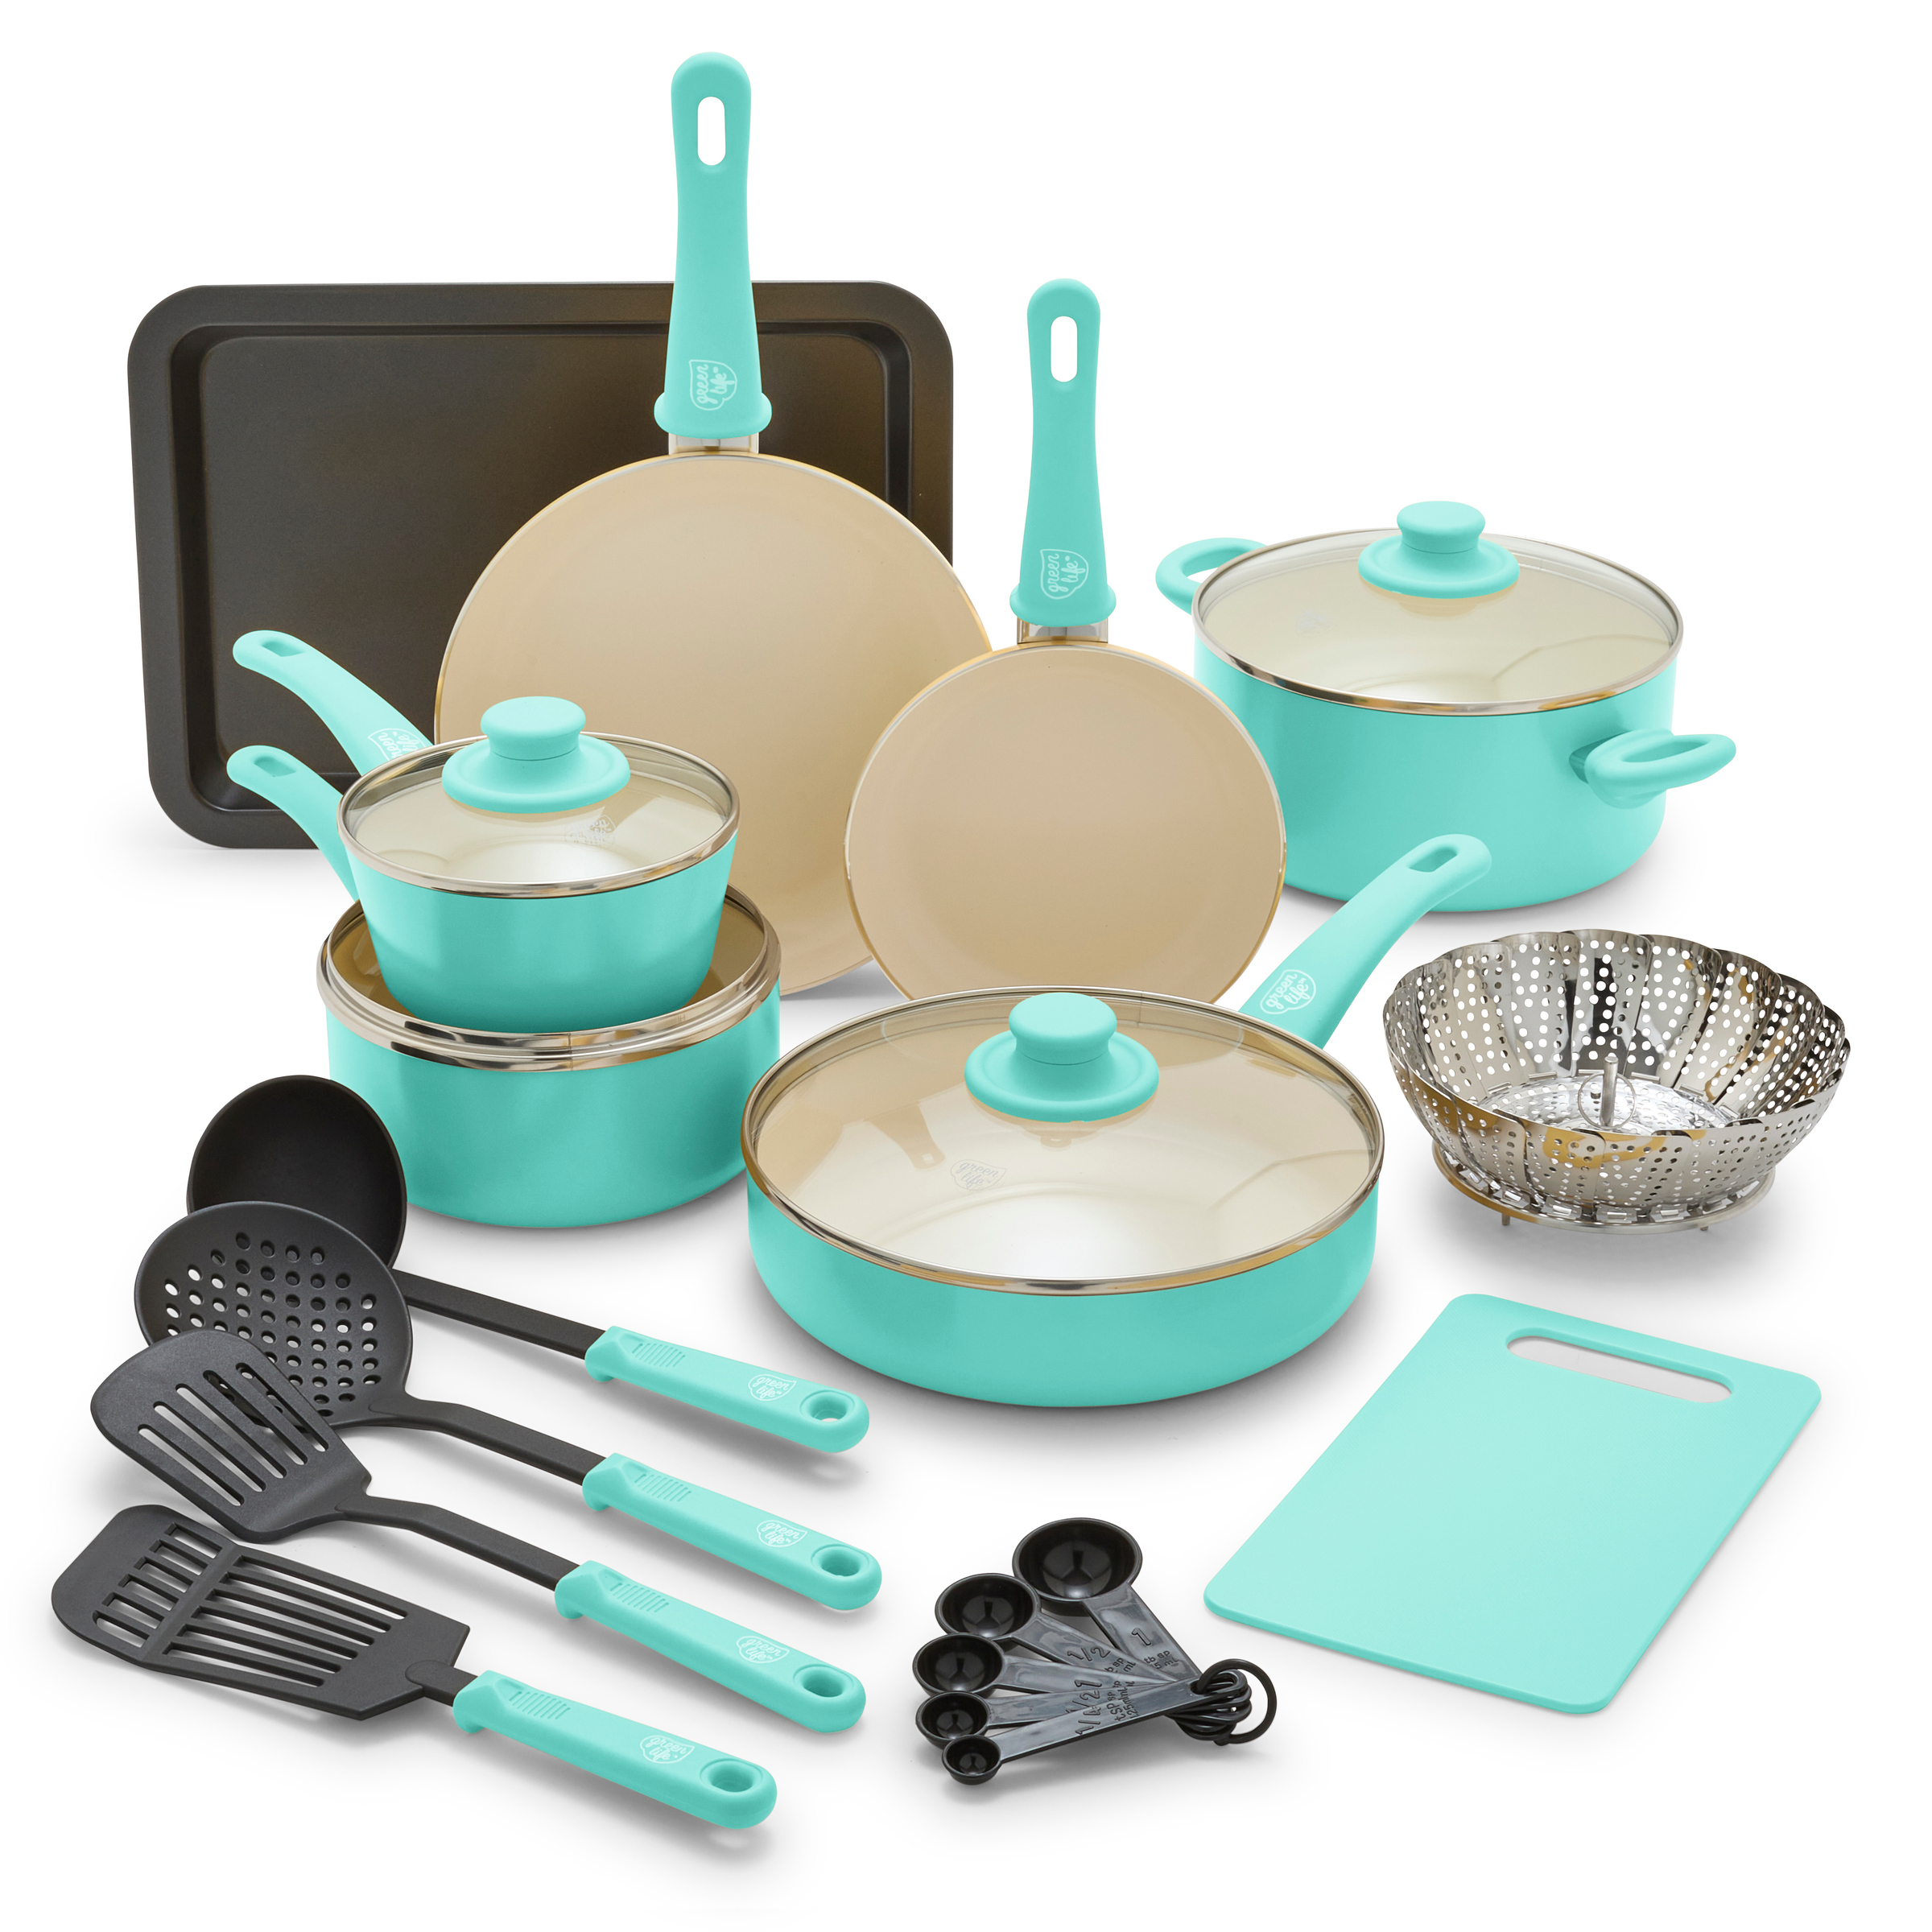 GreenLife 18-Piece Soft Grip Toxin-Free Healthy Ceramic Non-Stick Cookware Set, Turquoise, Dishwasher Safe - image 1 of 12